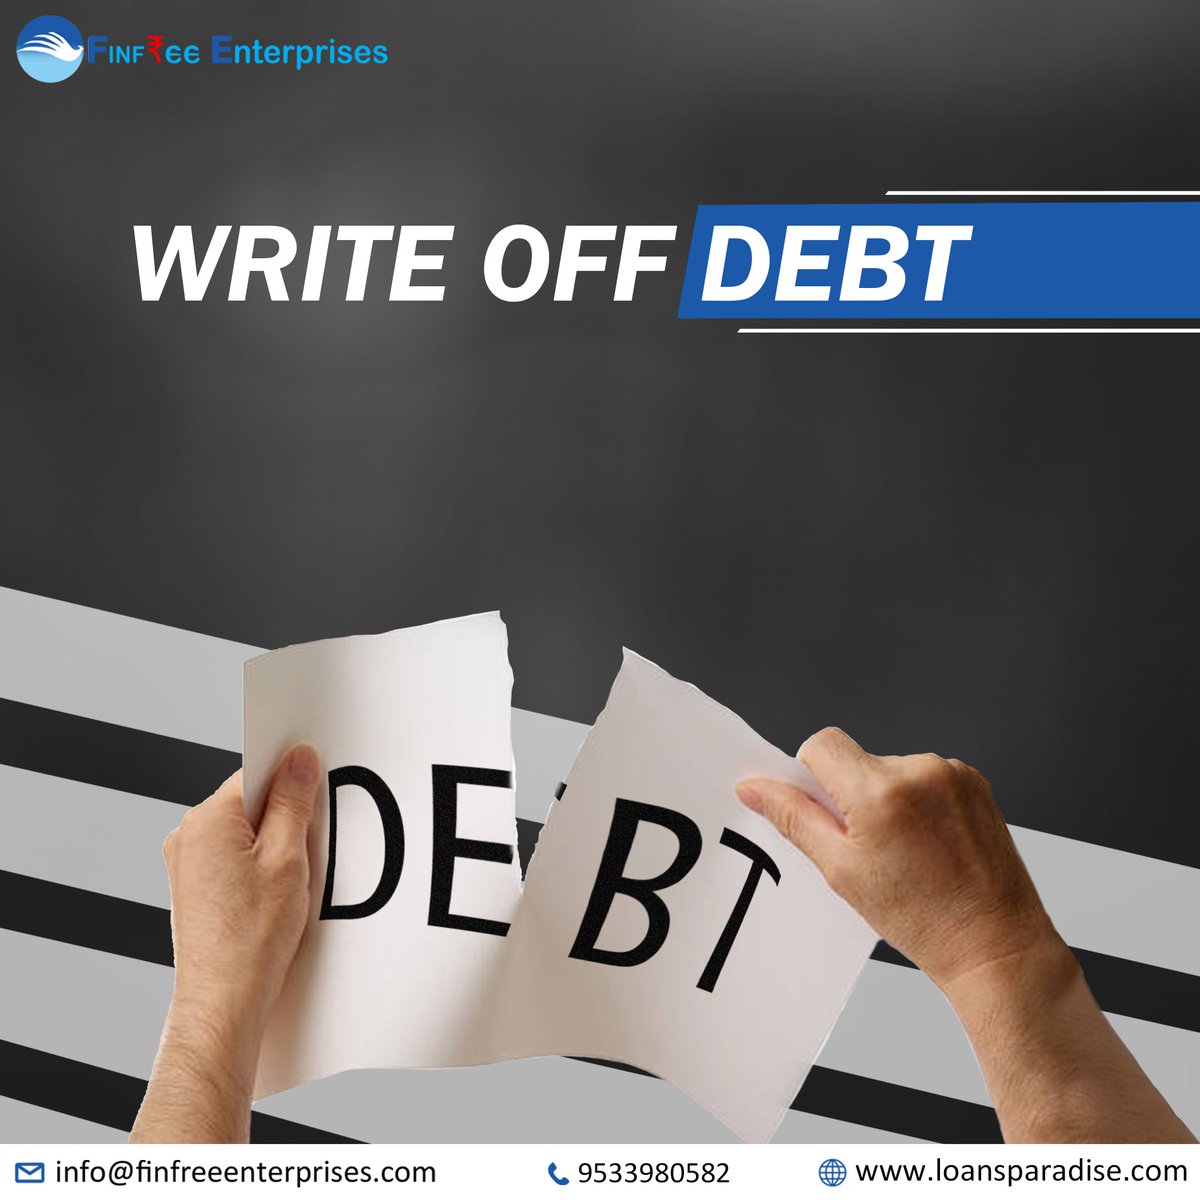 Worried about too many debts? Get #personalloans for #debtconsolidation from our personal loans providers, and get over your debts safely! Visit: loansparadise.com
#QuickBusinessLoans #FastBusinessLoans #BusinessLoans #QuickLoans #PersonalLoansHyderabad #FinfreeEnterprises